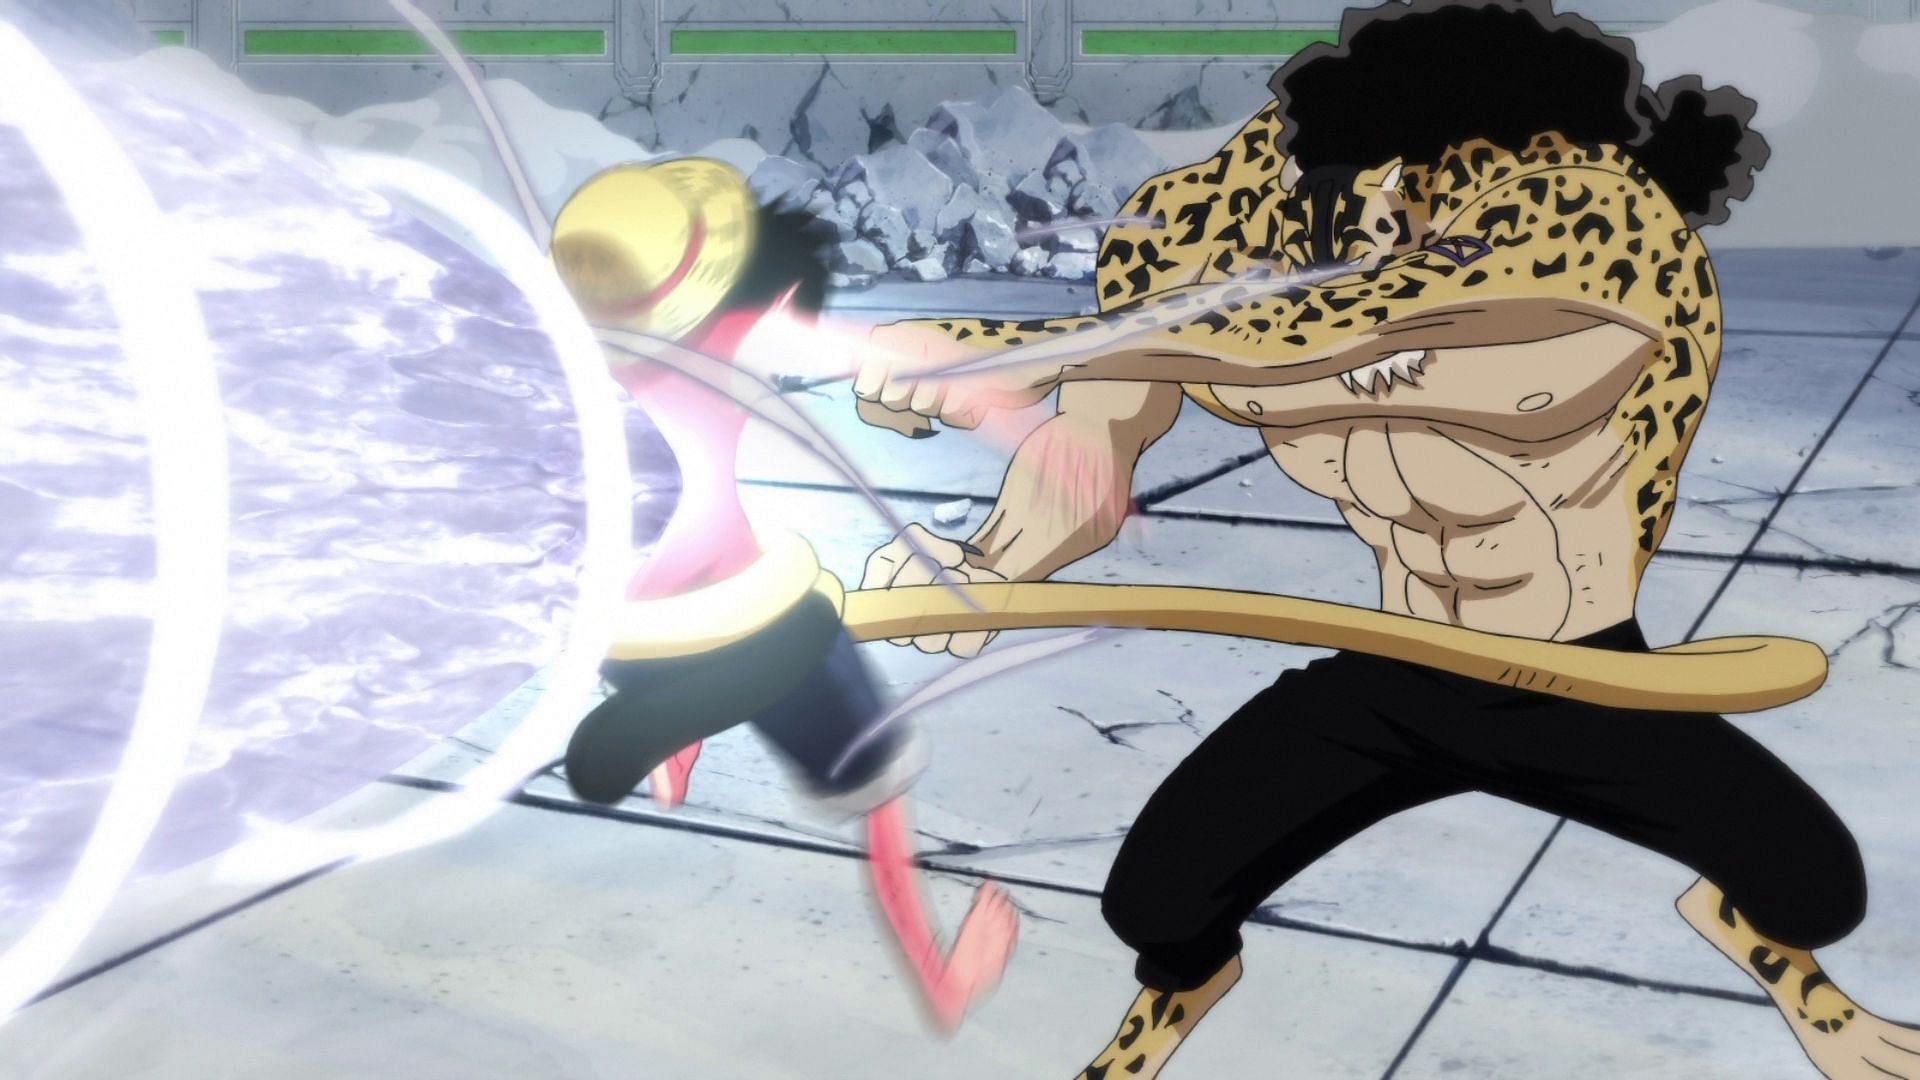 Gear 5 Luffy vs Awakened Rob Lucci and CP0! Vegapunk's Death is